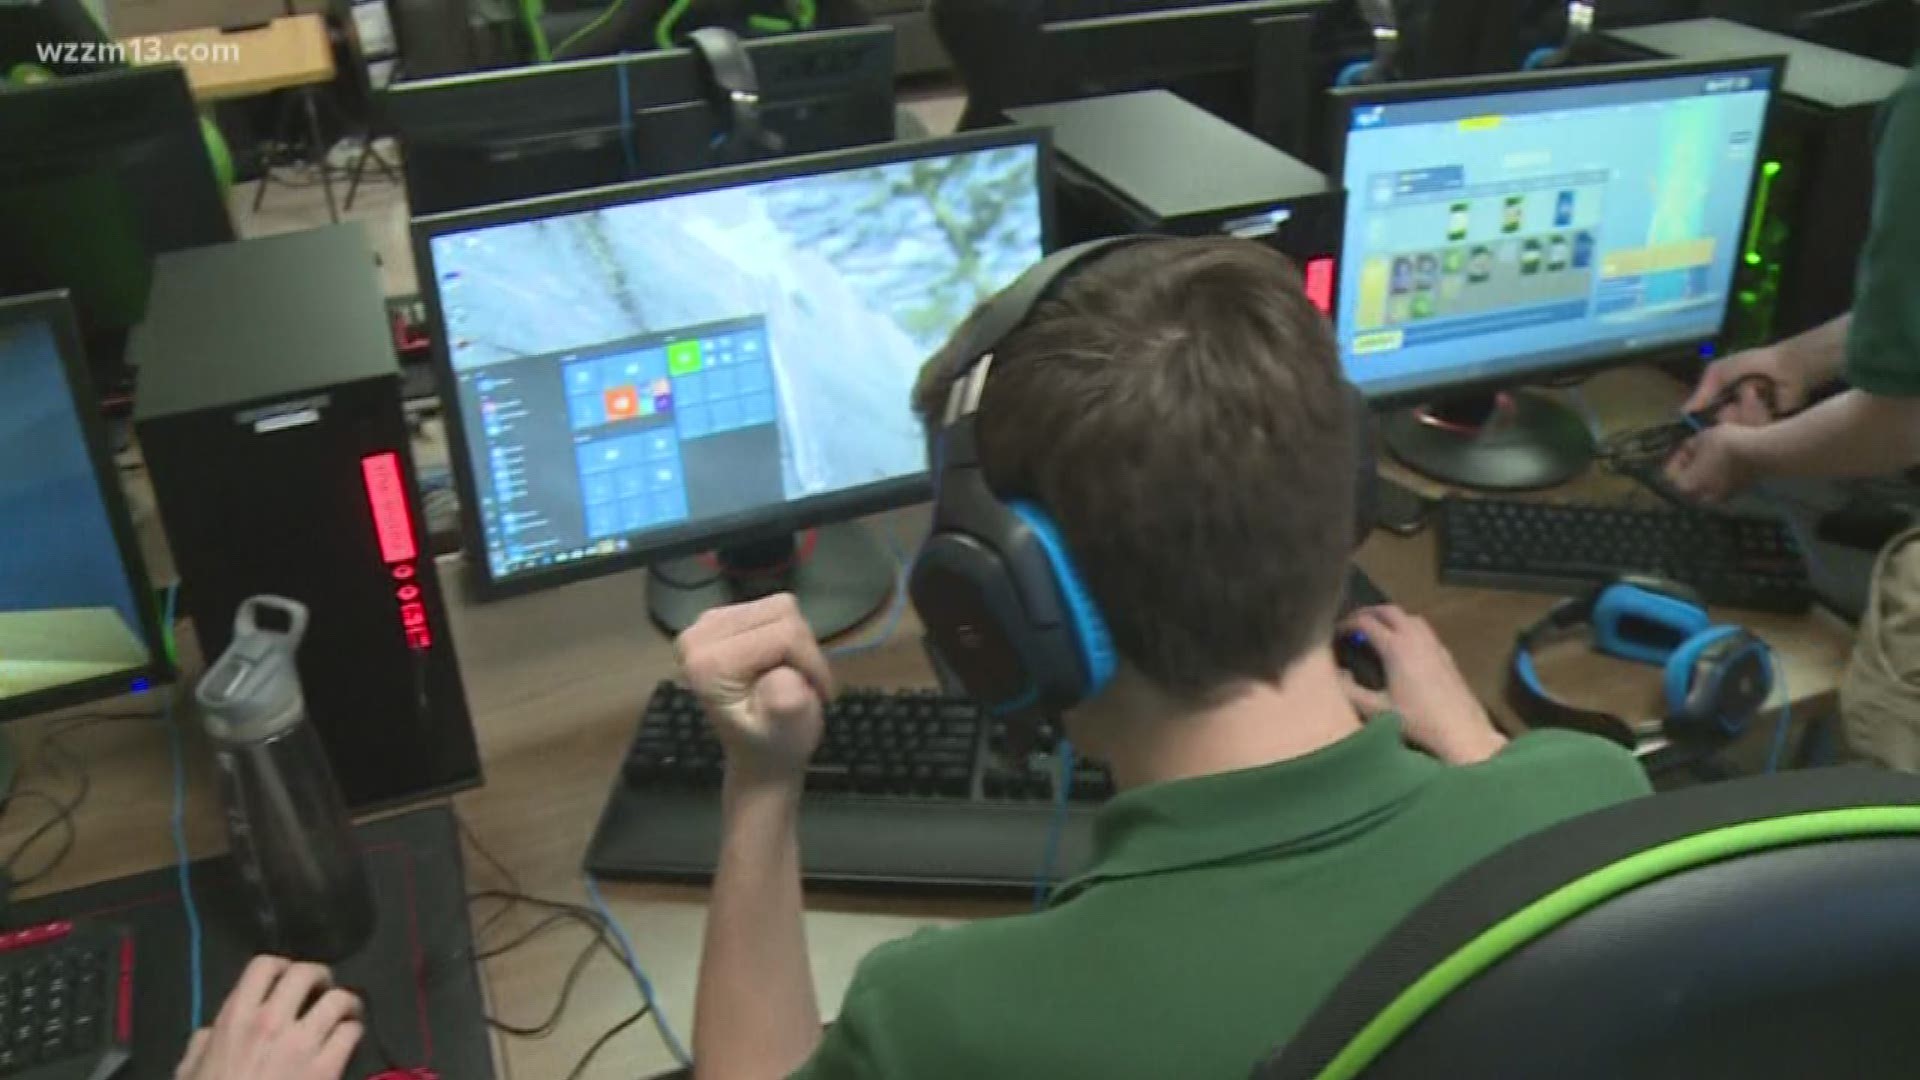 West Michigan schools embrace eSports with programs for students